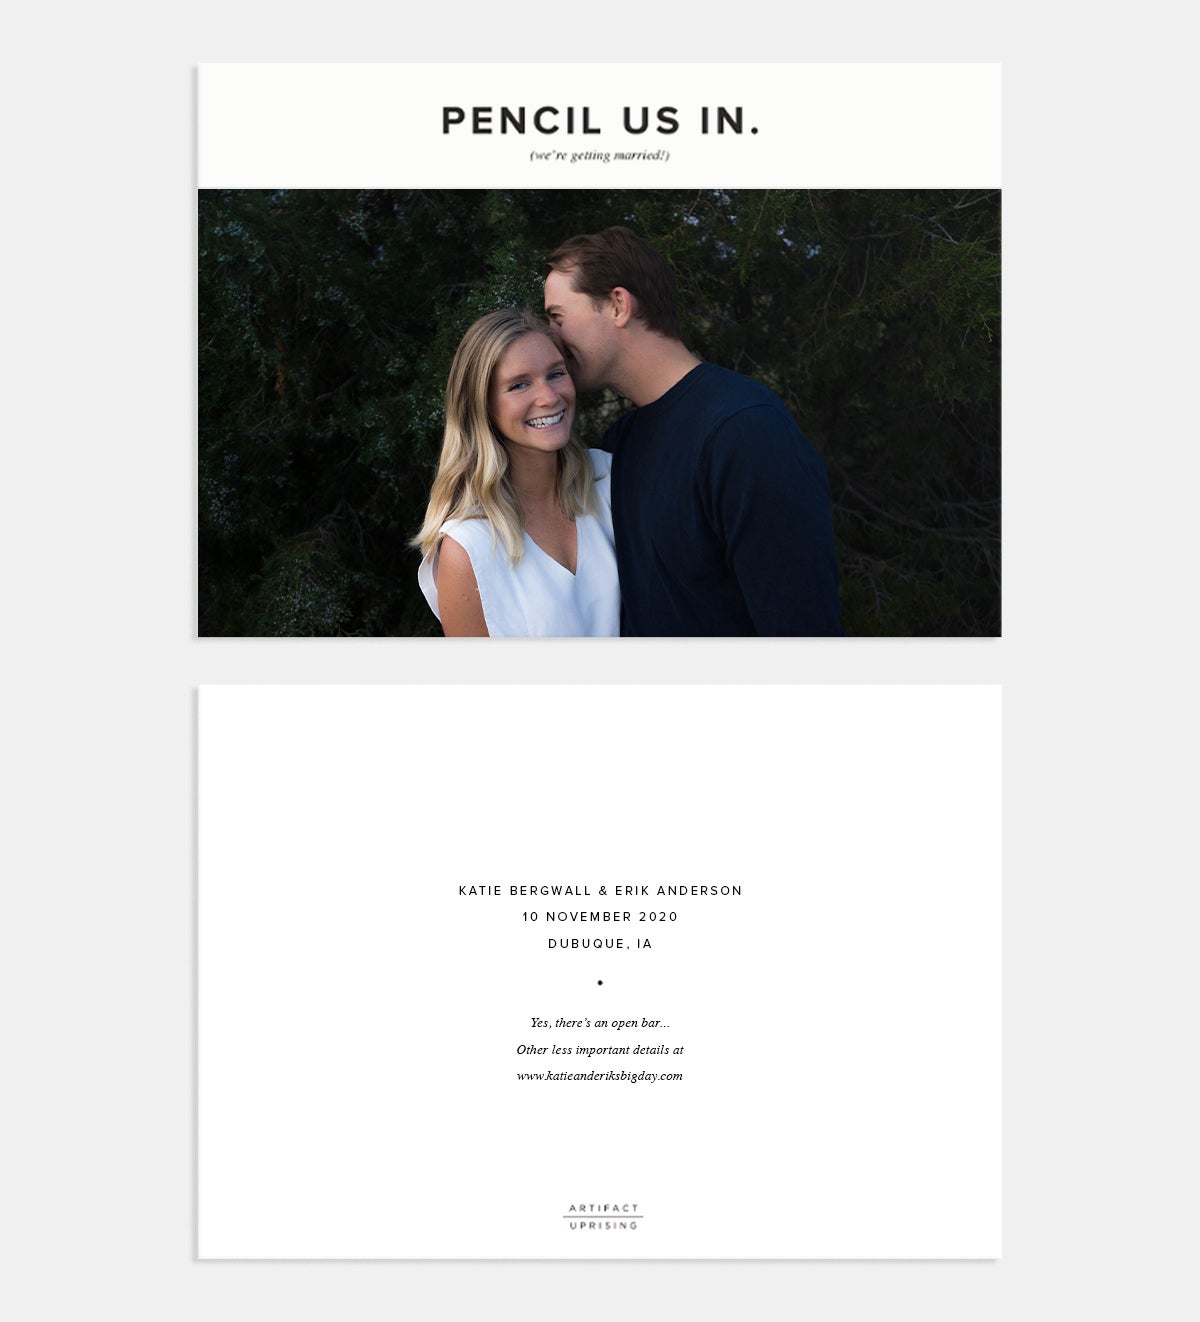 Pencil Us In Save the Date Card by Artifact Uprising